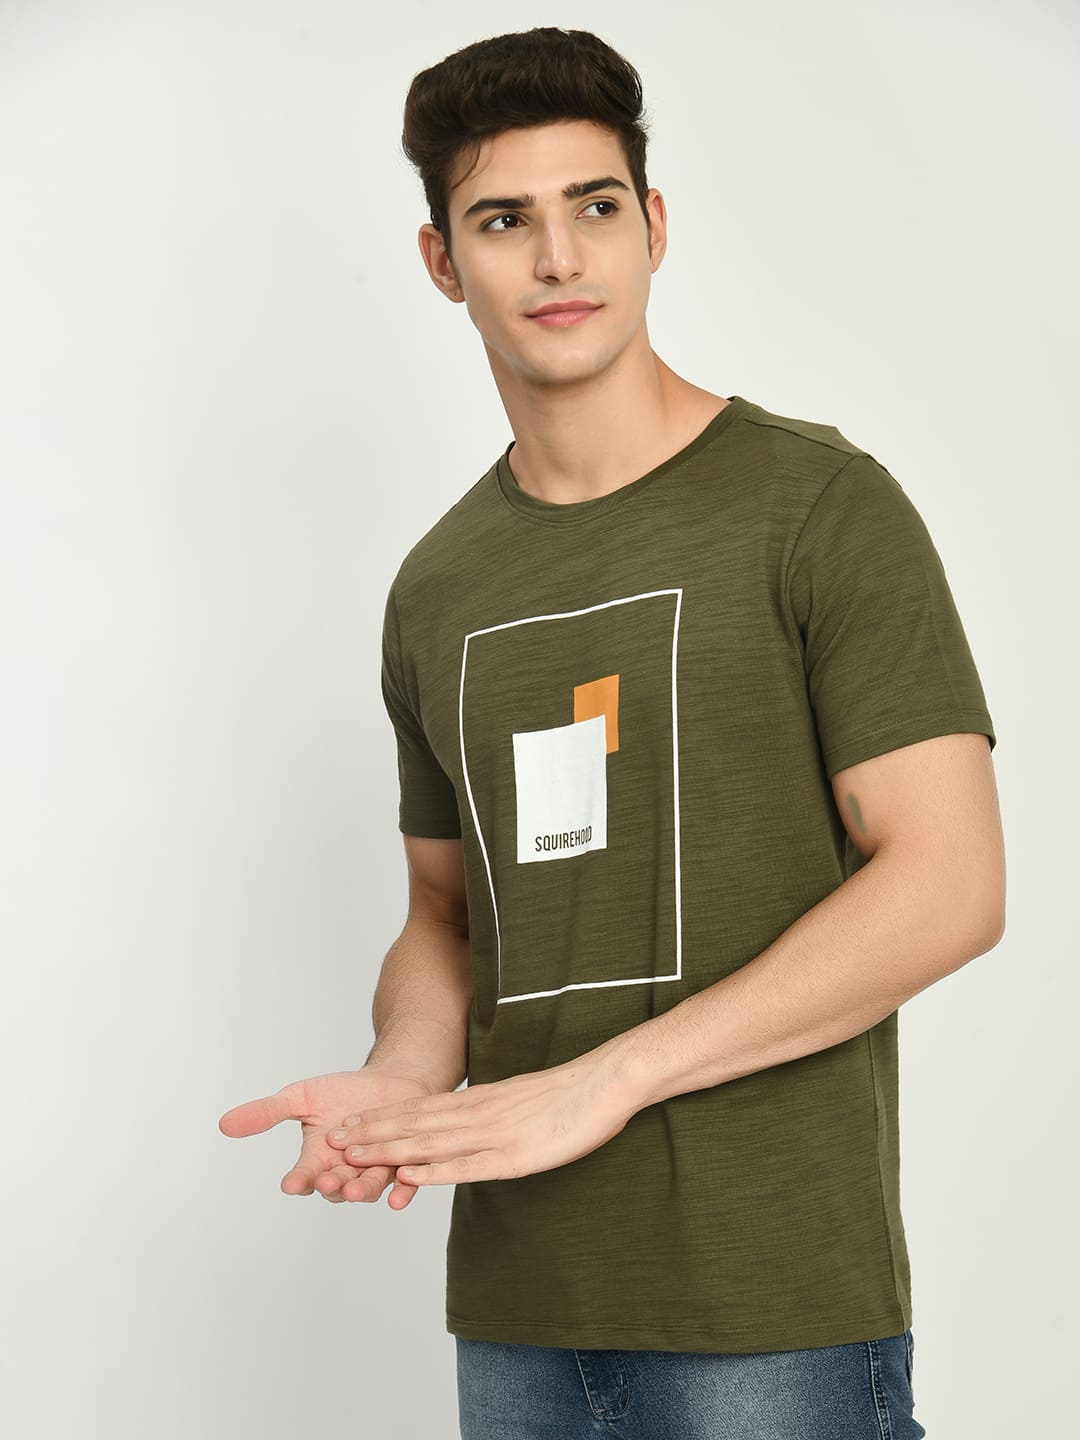 Men's Army Graphic Printed T-Shirt.